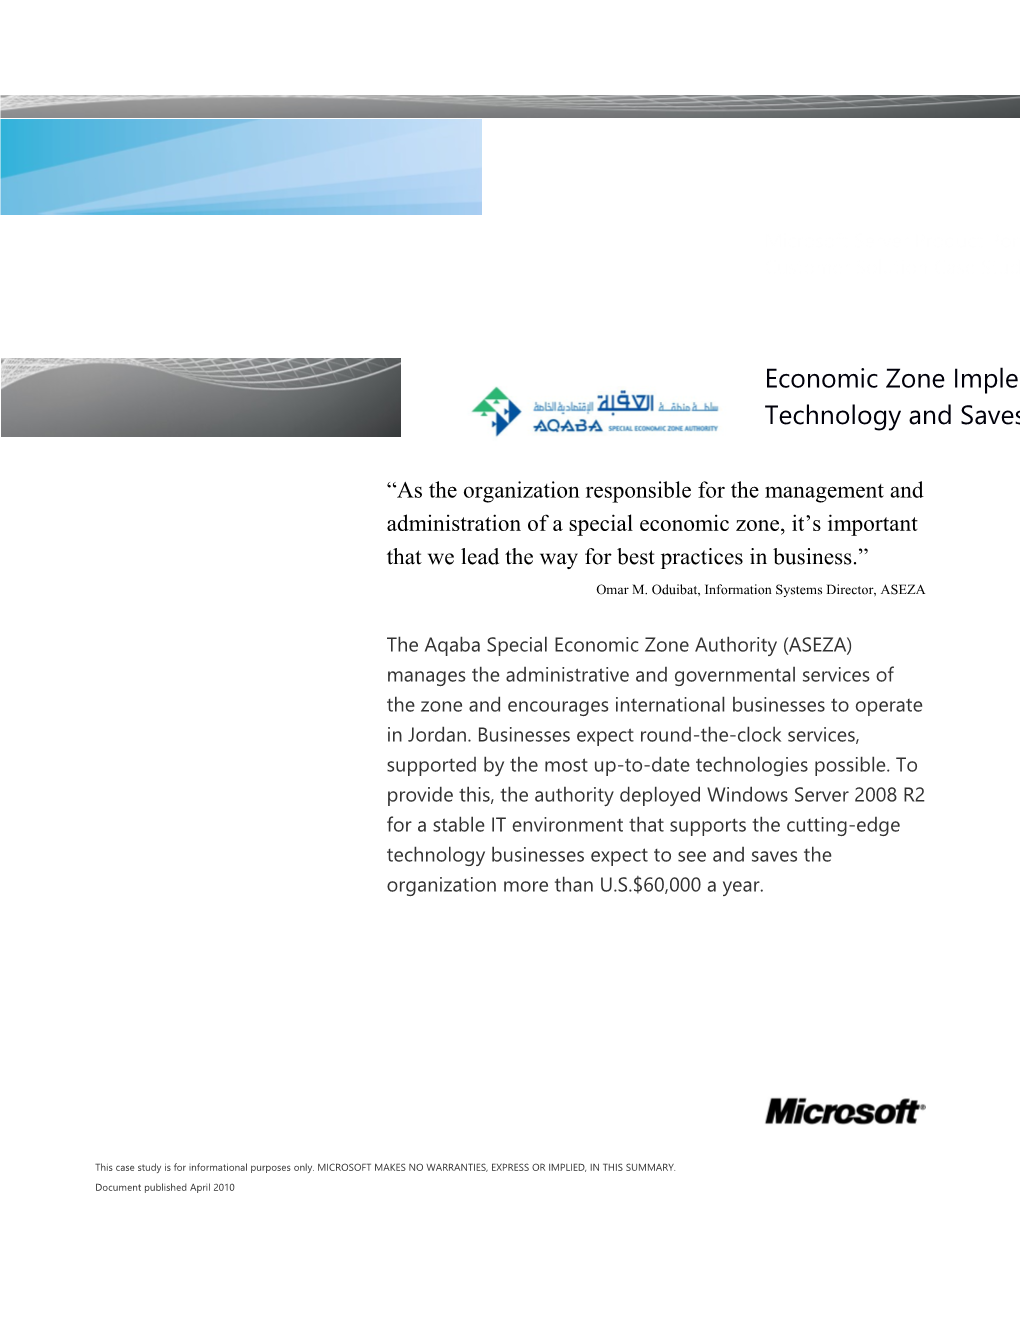 Writeimage CSB Economic Zone Implements Cutting Edge Technology and Saves Over $60,000 a Year